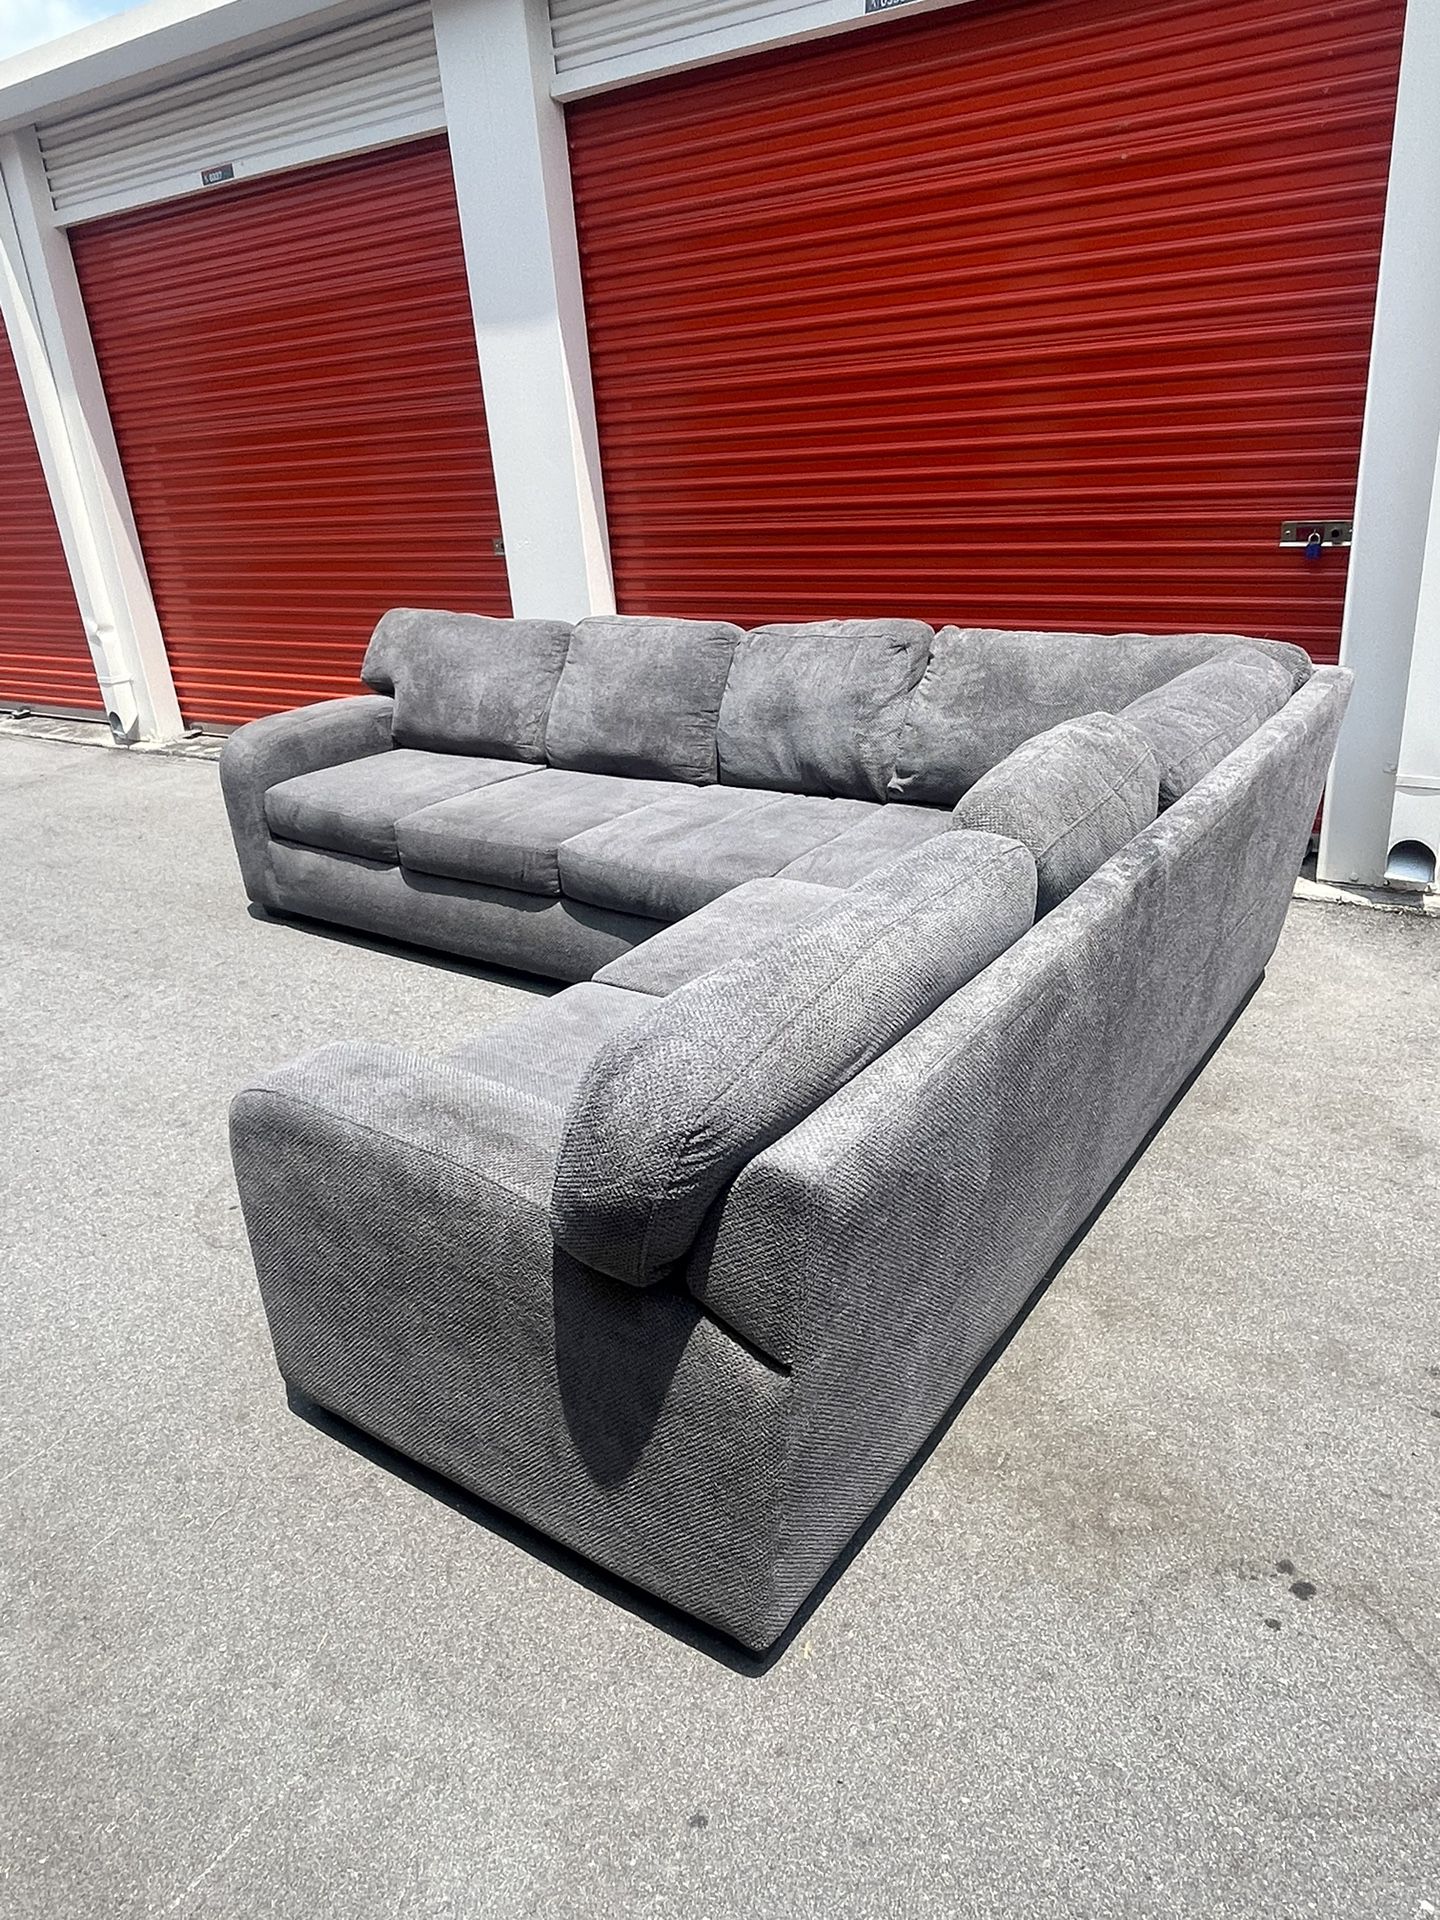 GREY SECTIONAL 6 SEATER SOFA L-SHAPE